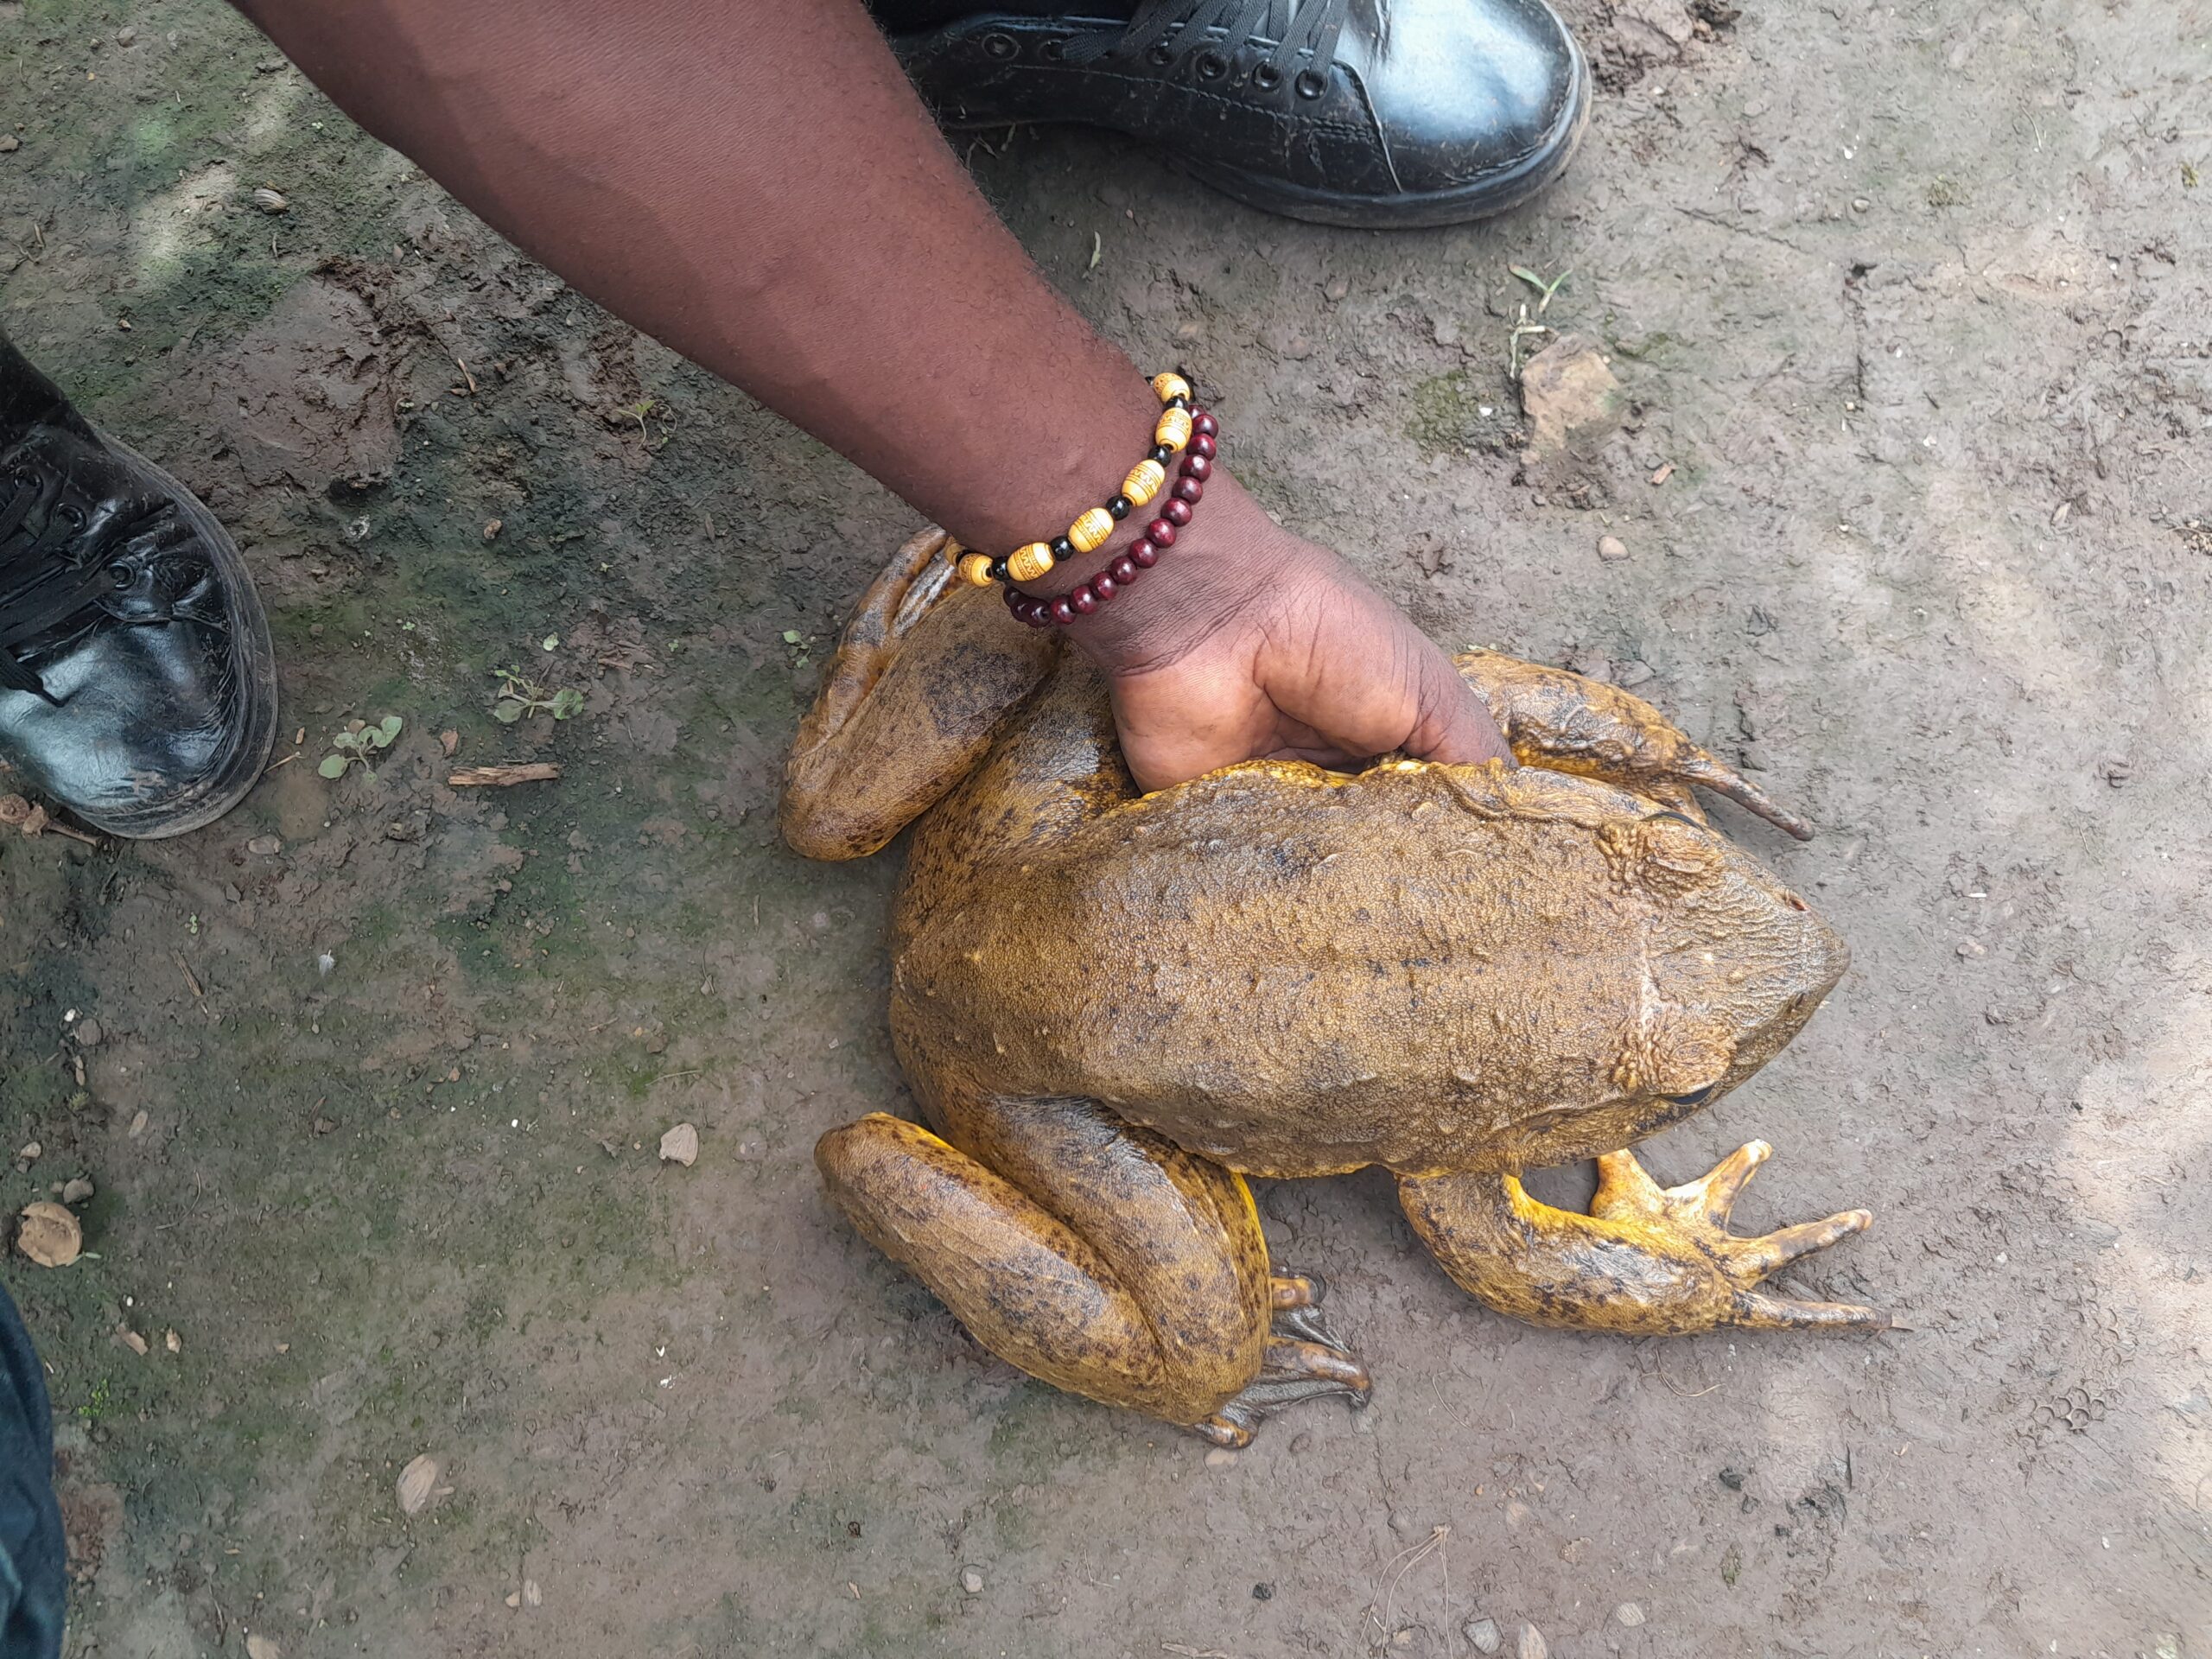 A goliath frog rescued by the Goliath Team after a report by a former poacher. 